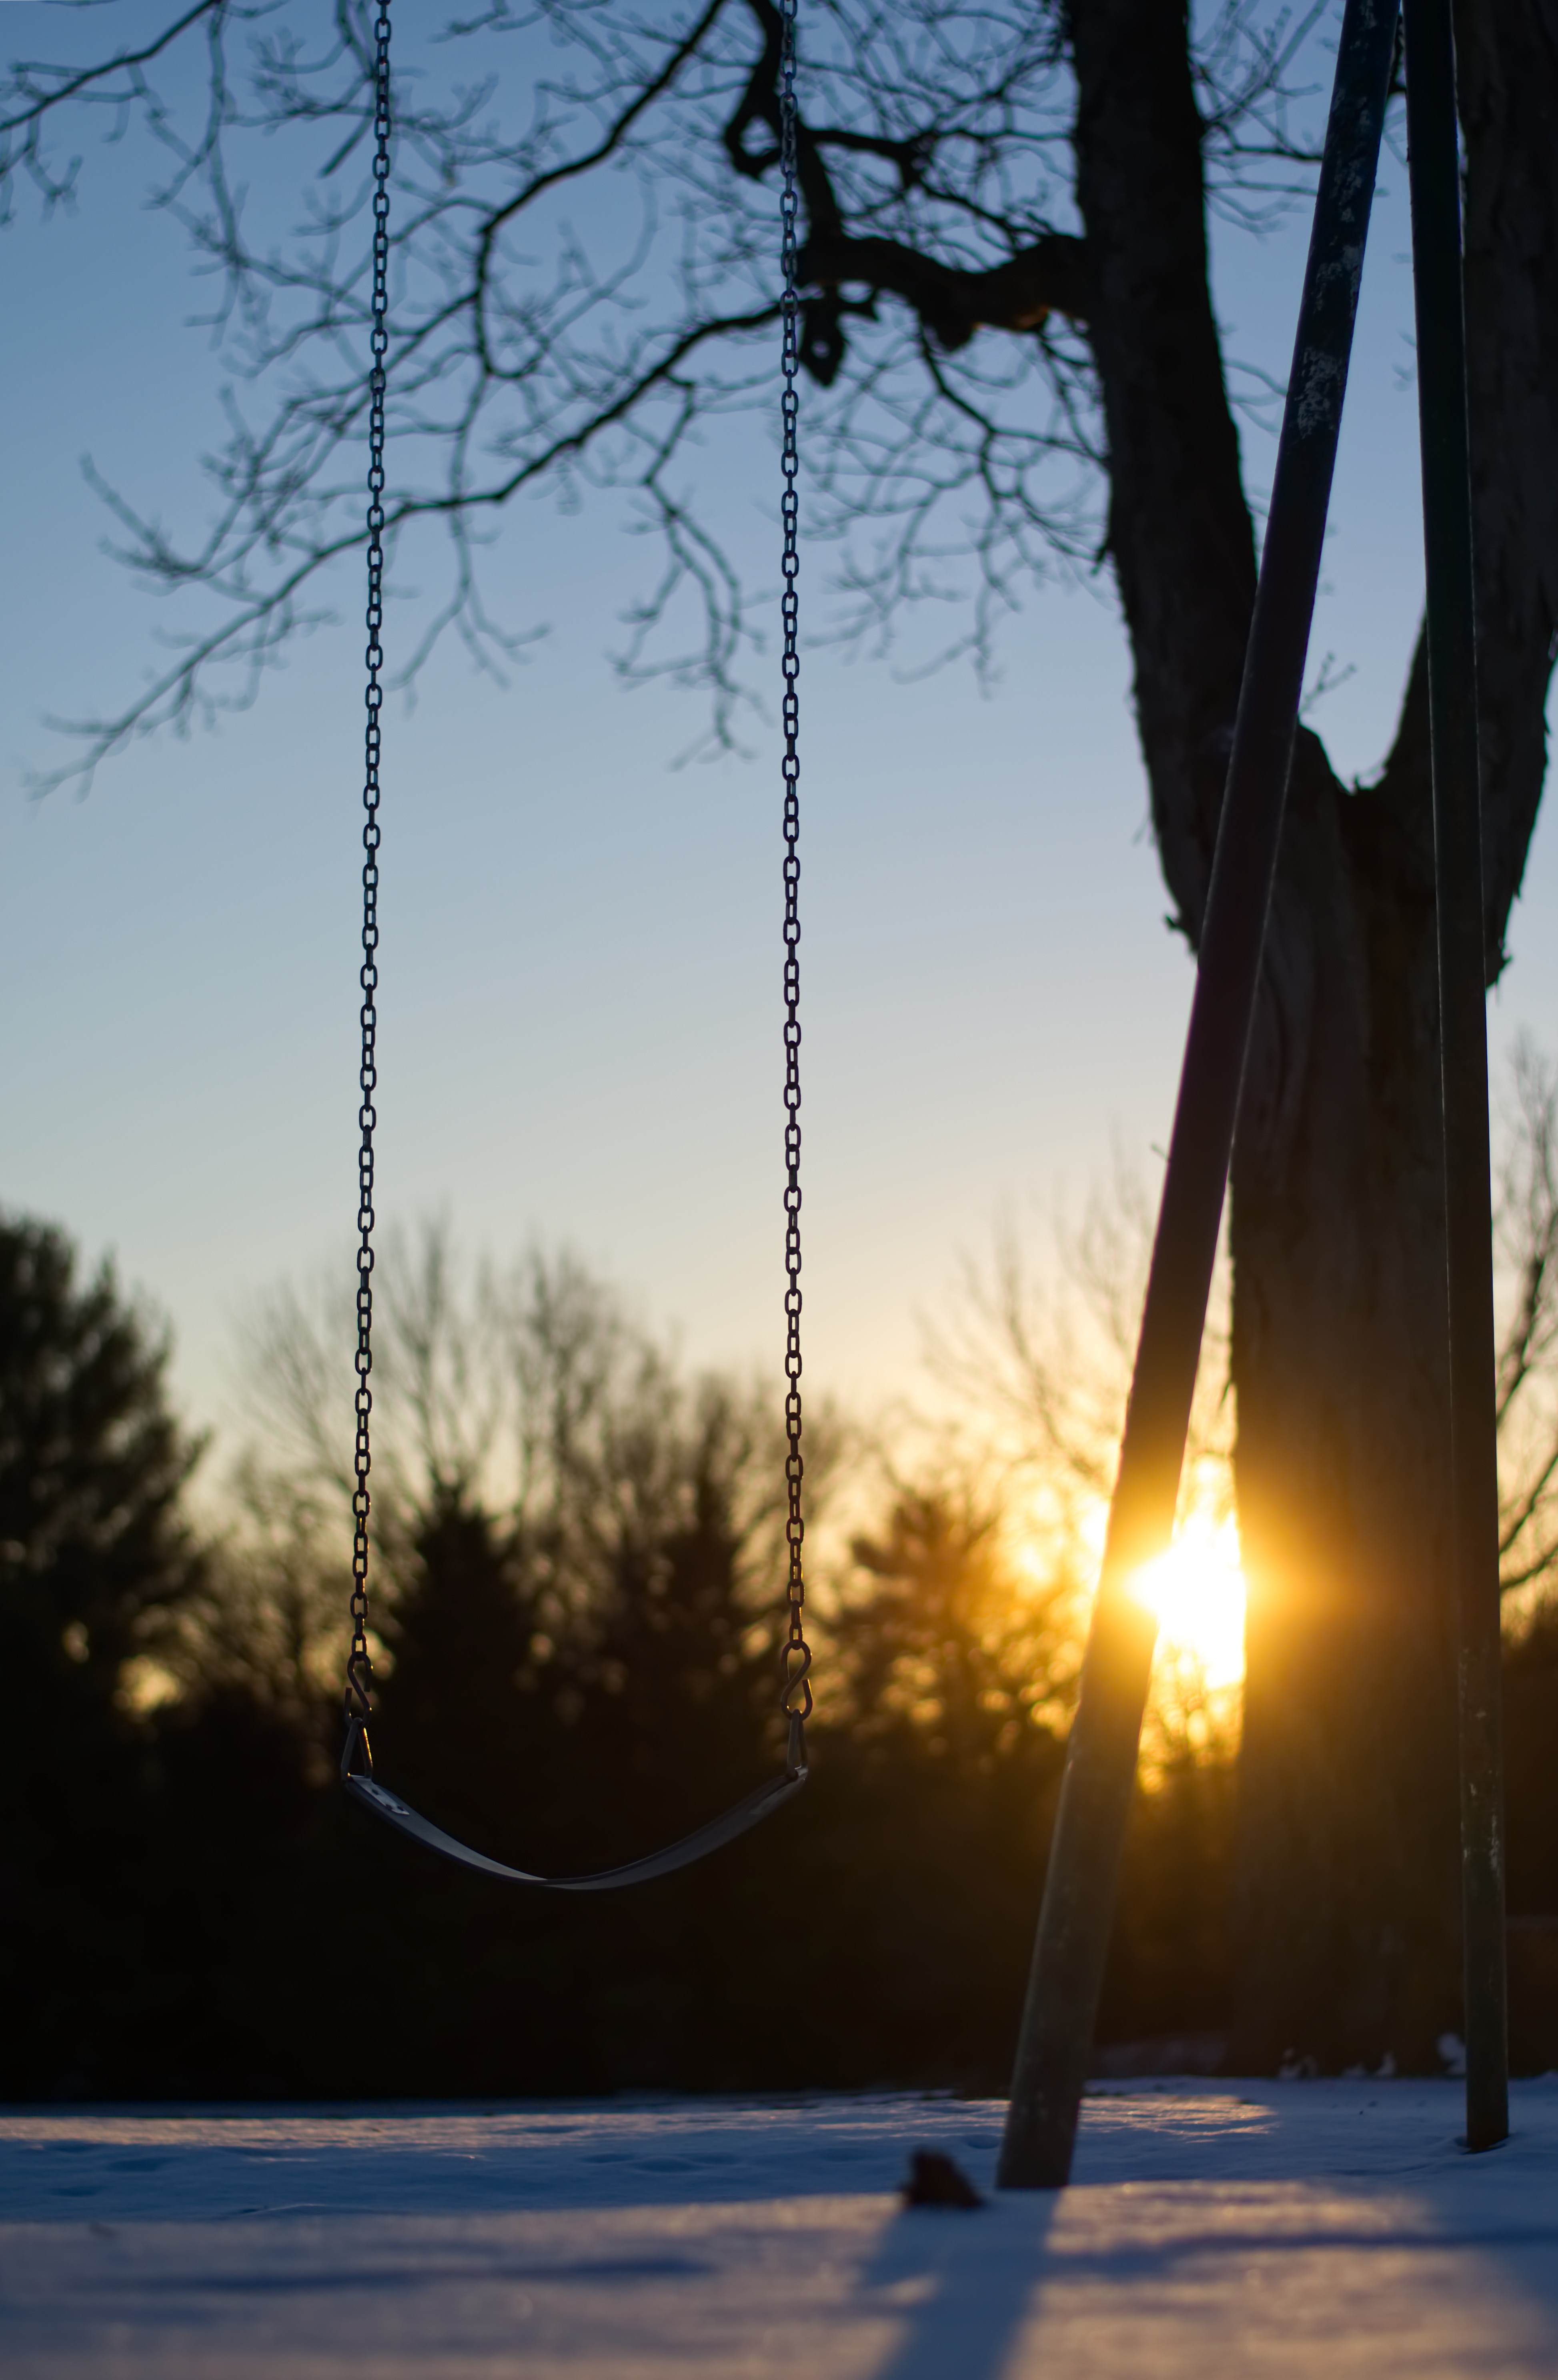 sunset, smooth, winter, miscellanea, miscellaneous, wood, tree, blur, swing High Definition image